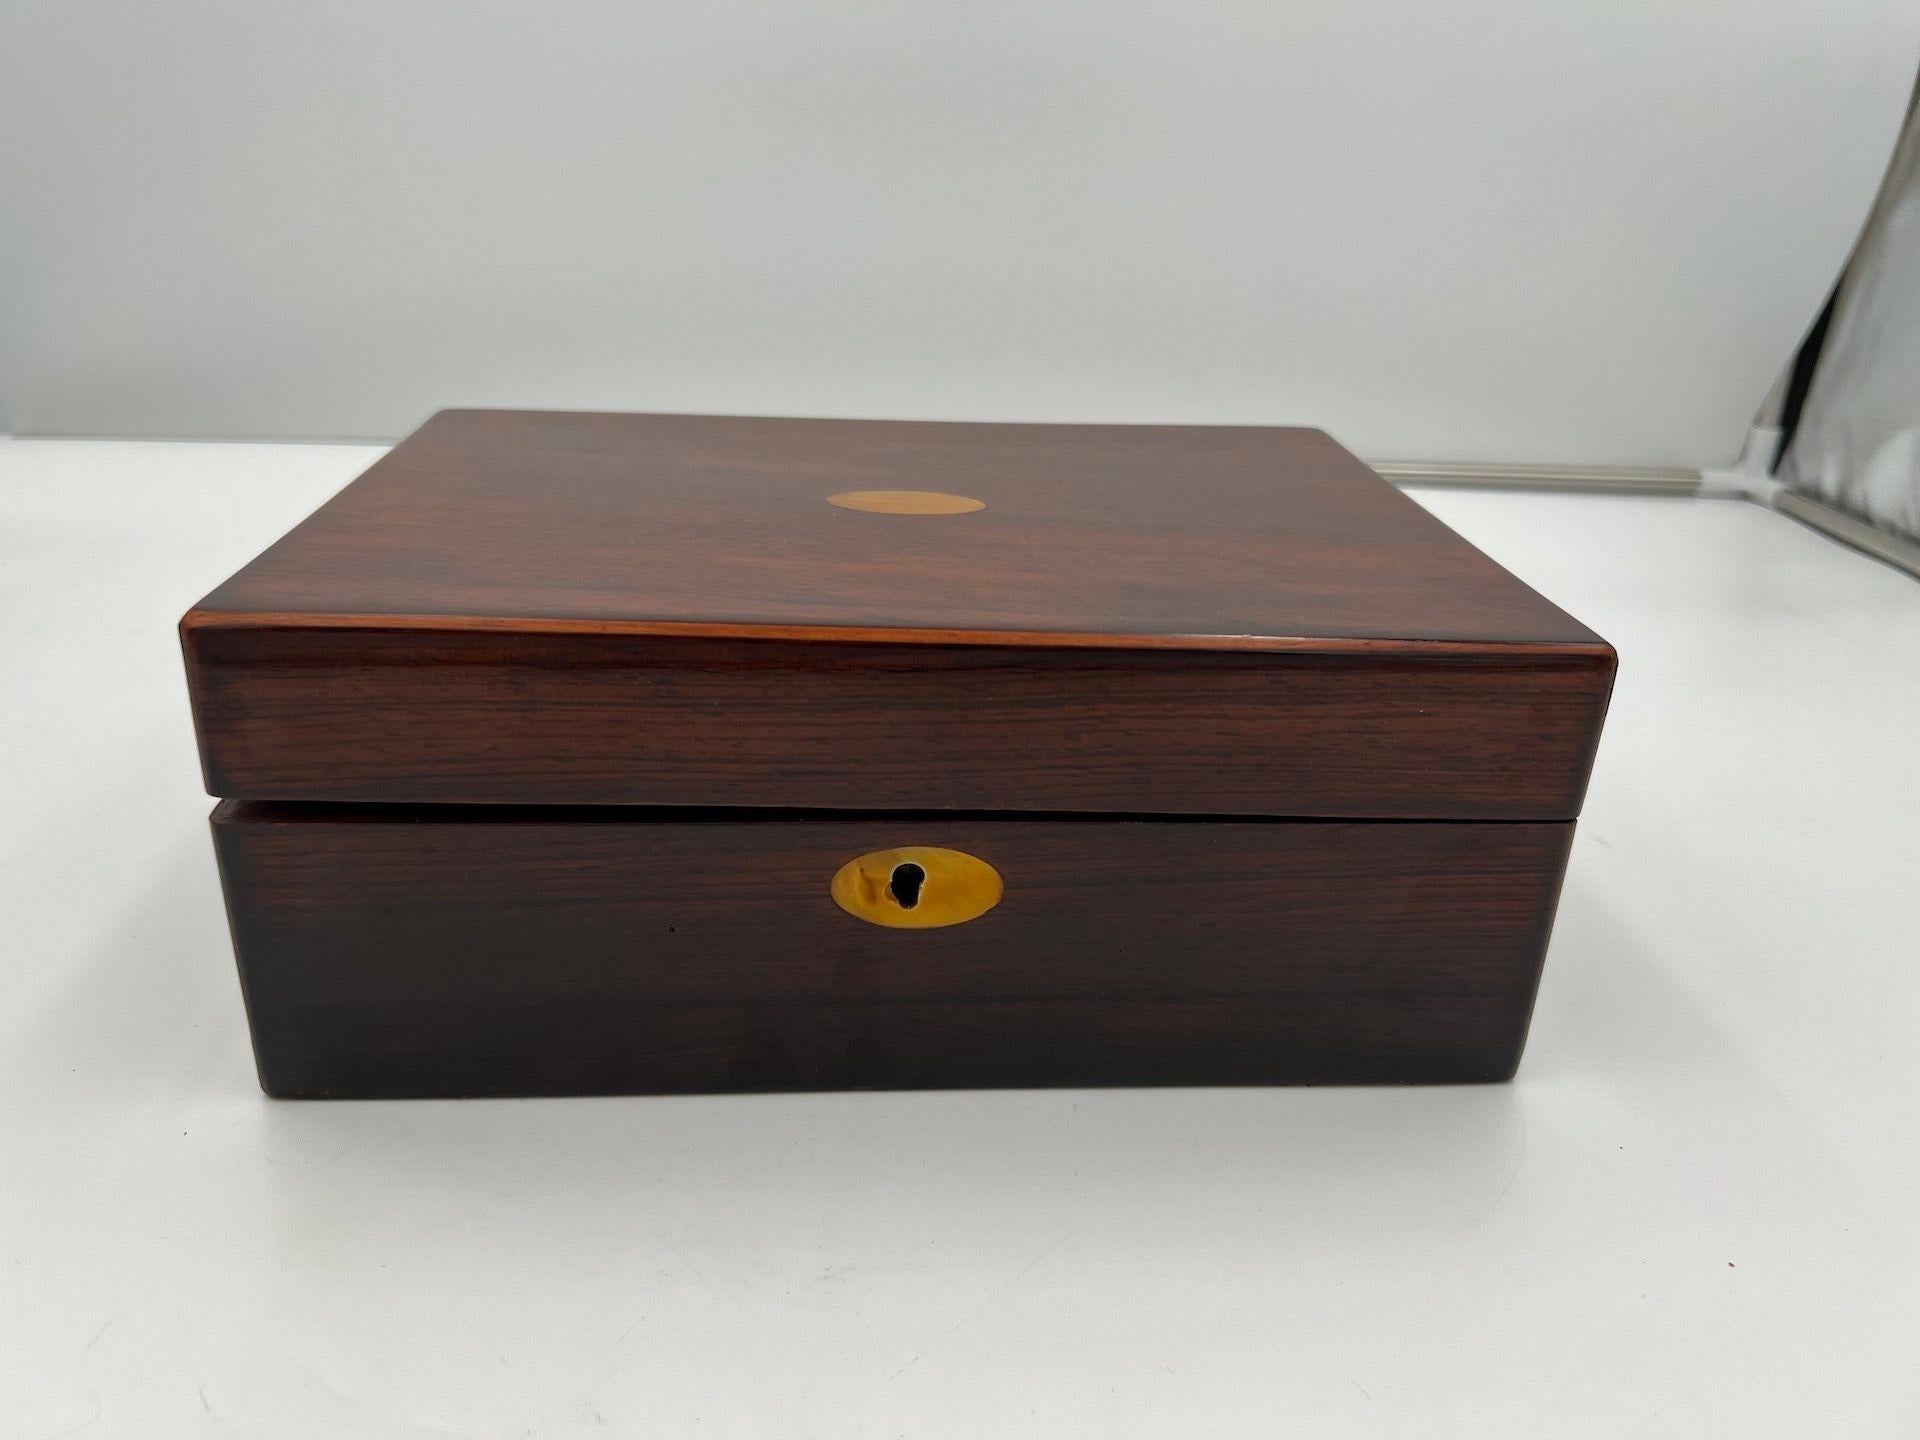 Antique neoclassical box, rosewood and maple.
Mother-of-pearl inlays. Refinished condition, hand-polished with shellac.
 
Dimensions, H 10 cm x W 27,5 cm x D 20 cm.